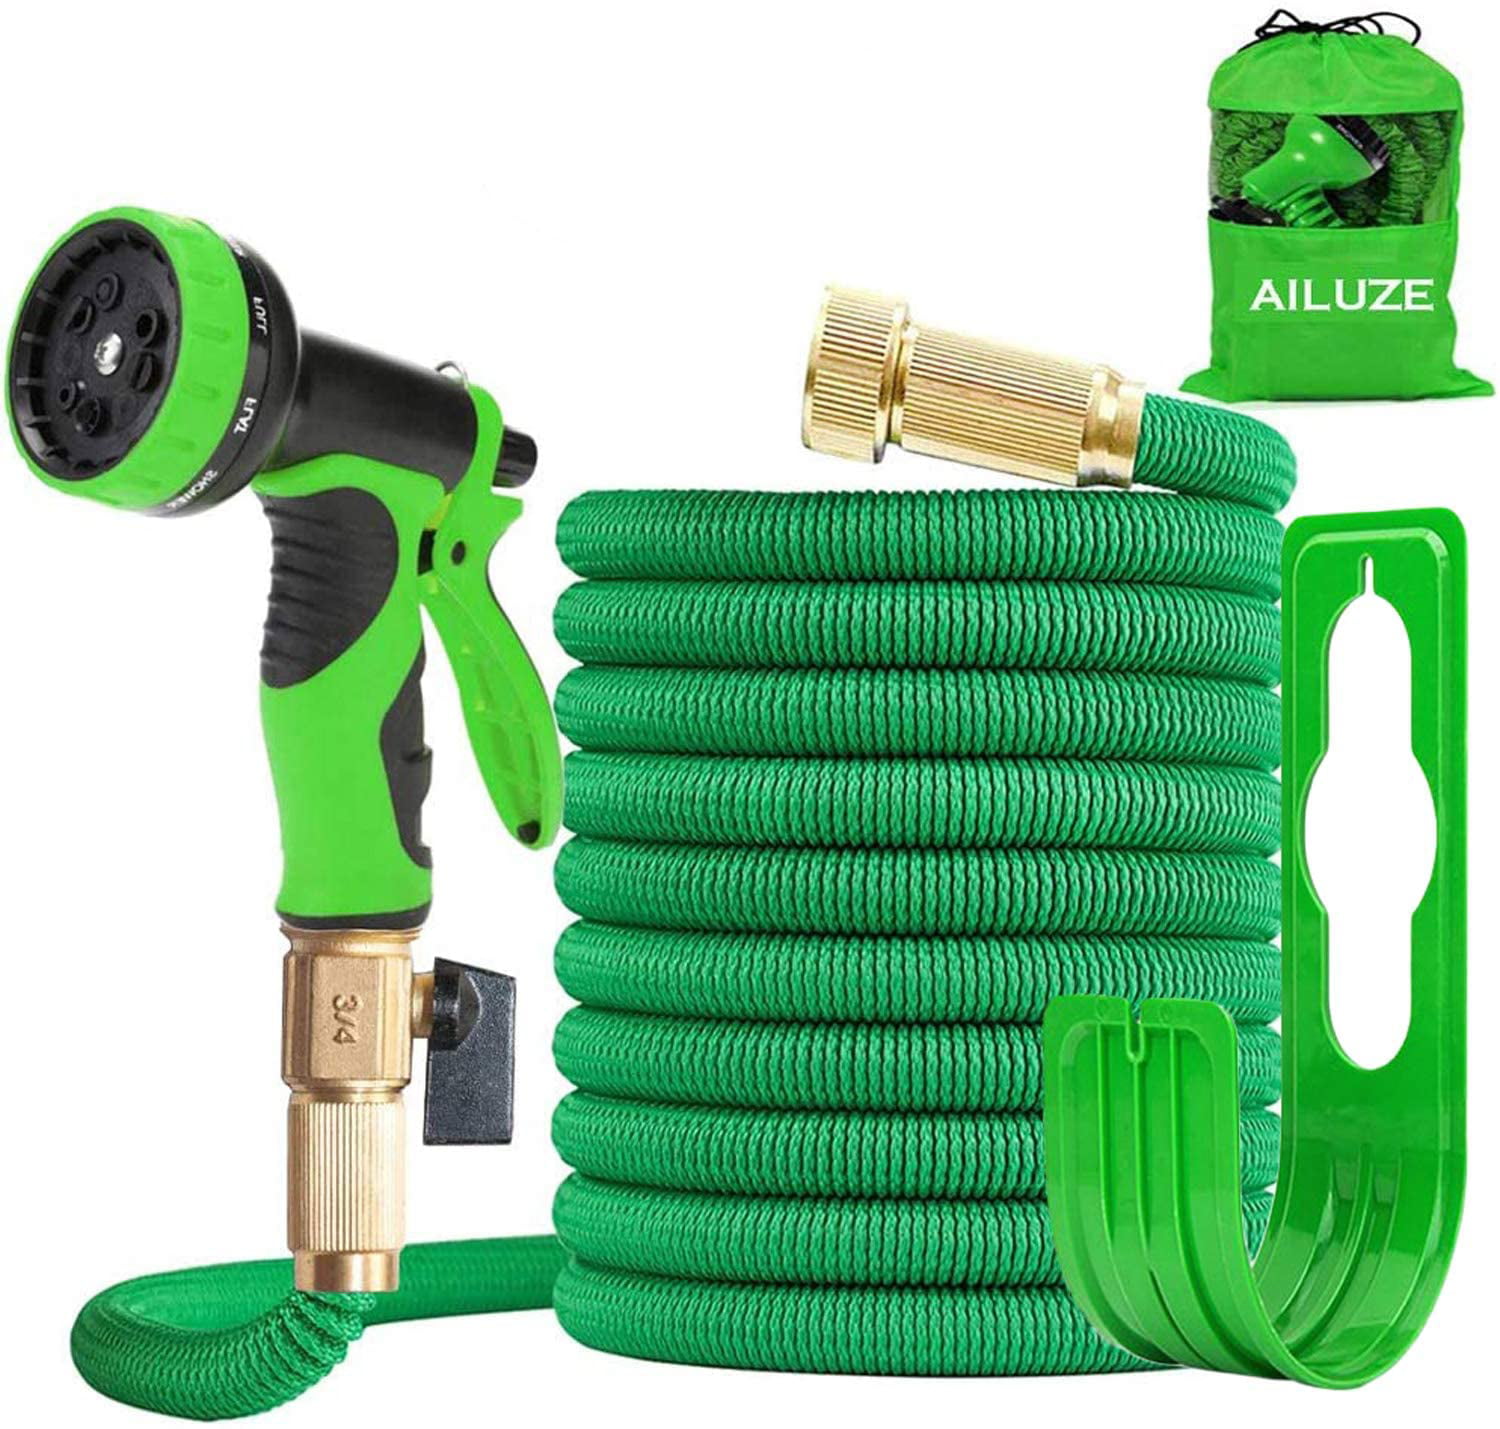 50ft Garden Hose,Expanding Garden Water Hose Pipe with 7 Function Spray Gun,3 Times Expandable Watering Hose,Flexible Magic Hose Anti-Leakage Lightweight Easy Storage Green 